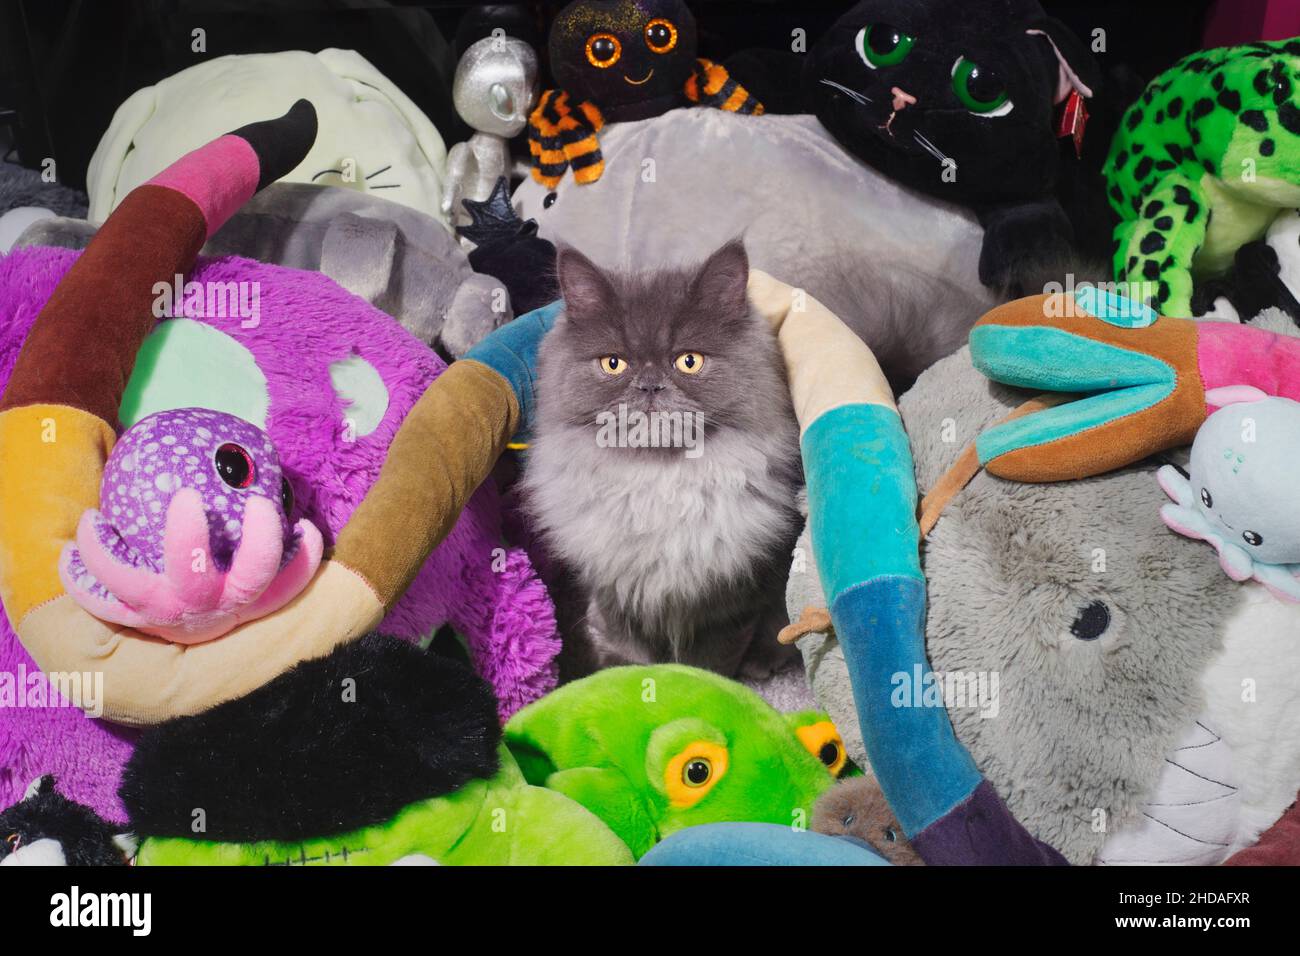 Cute fluffy grey cat sitting in a pile of stuffed animals. Stock Photo